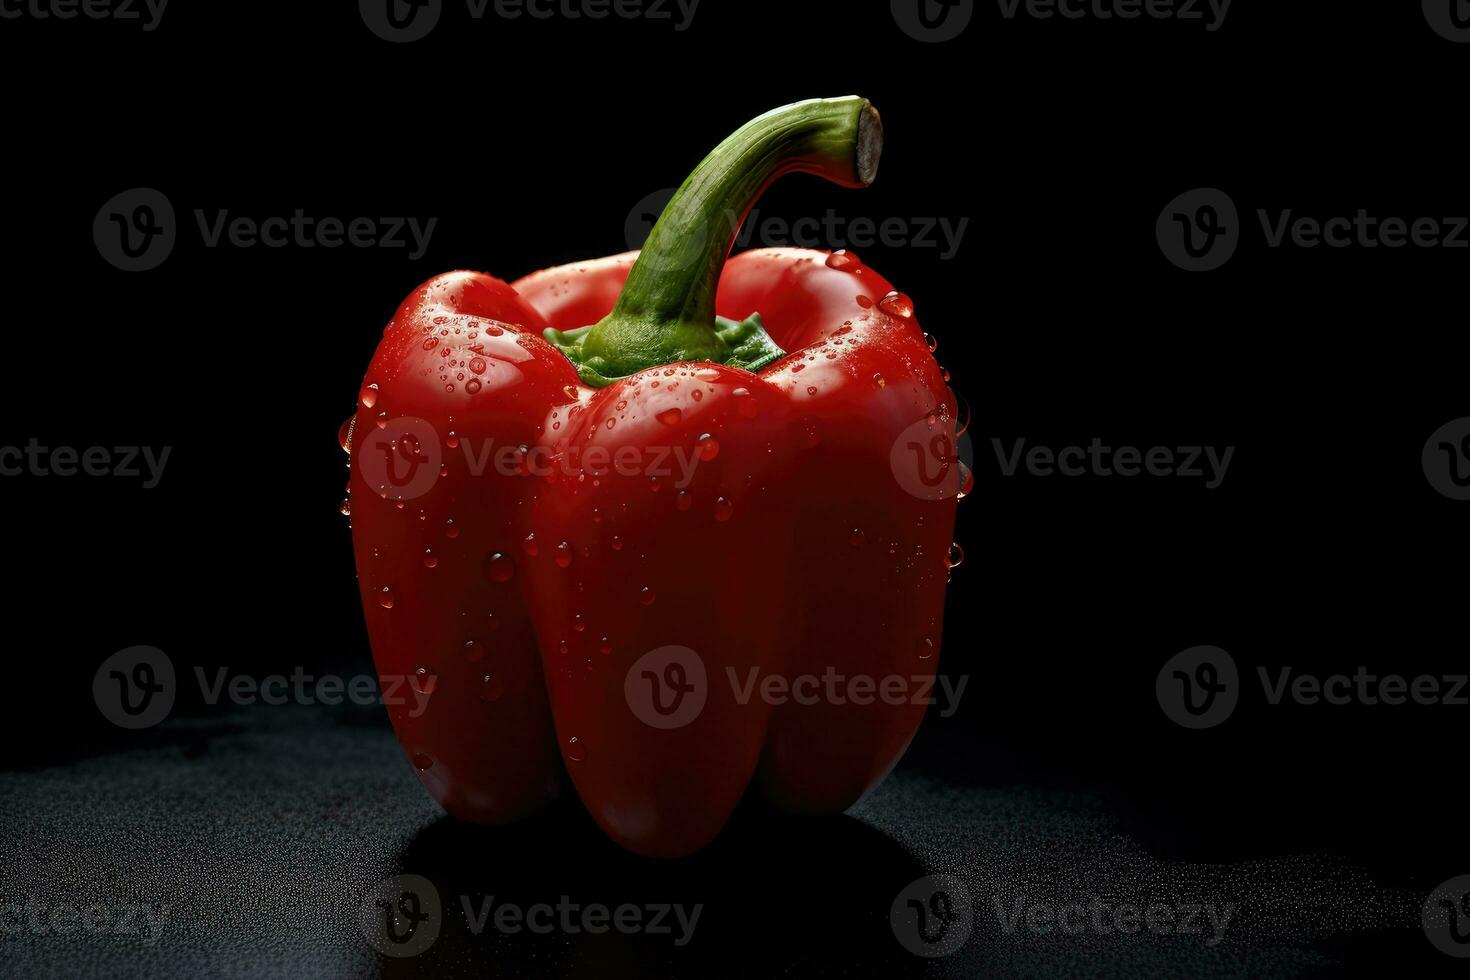 Red bell pepper on black background with drops of water. Studio shot. photo